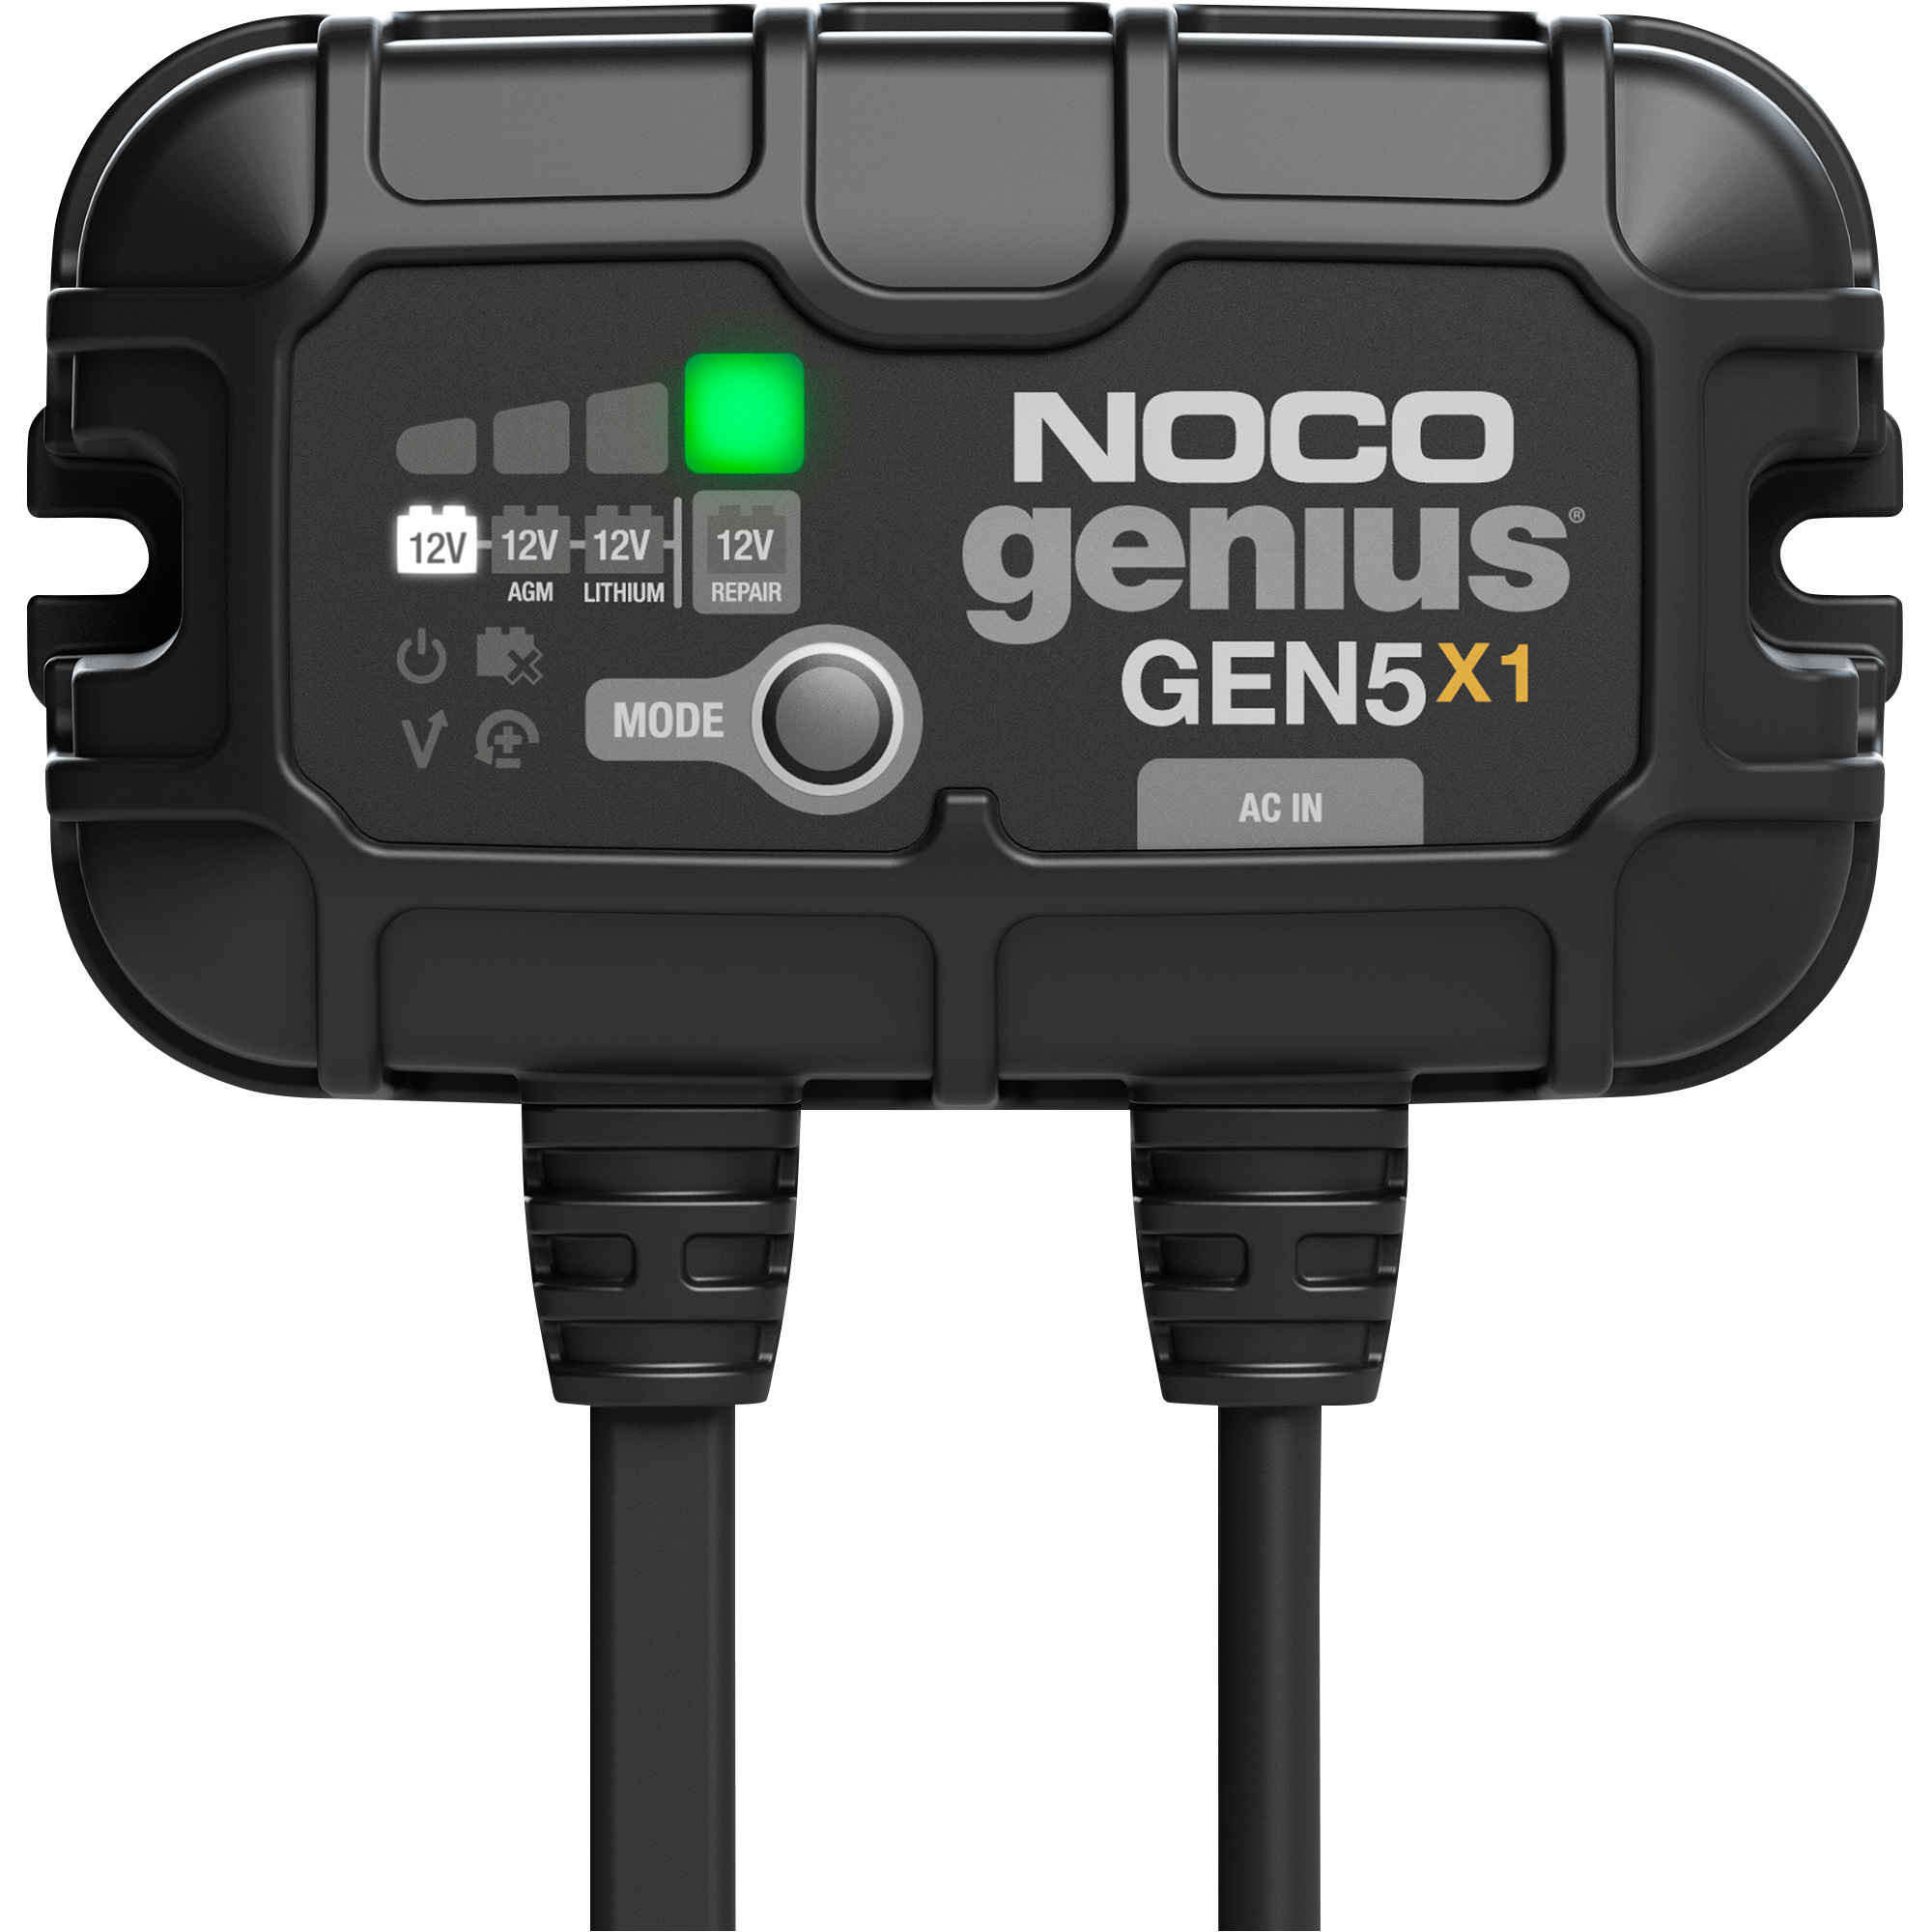 Noco Genius Onboard Battery Charger/Maintainer/Desulfator â 1 Bank, 5 Amps, Model GEN5X1